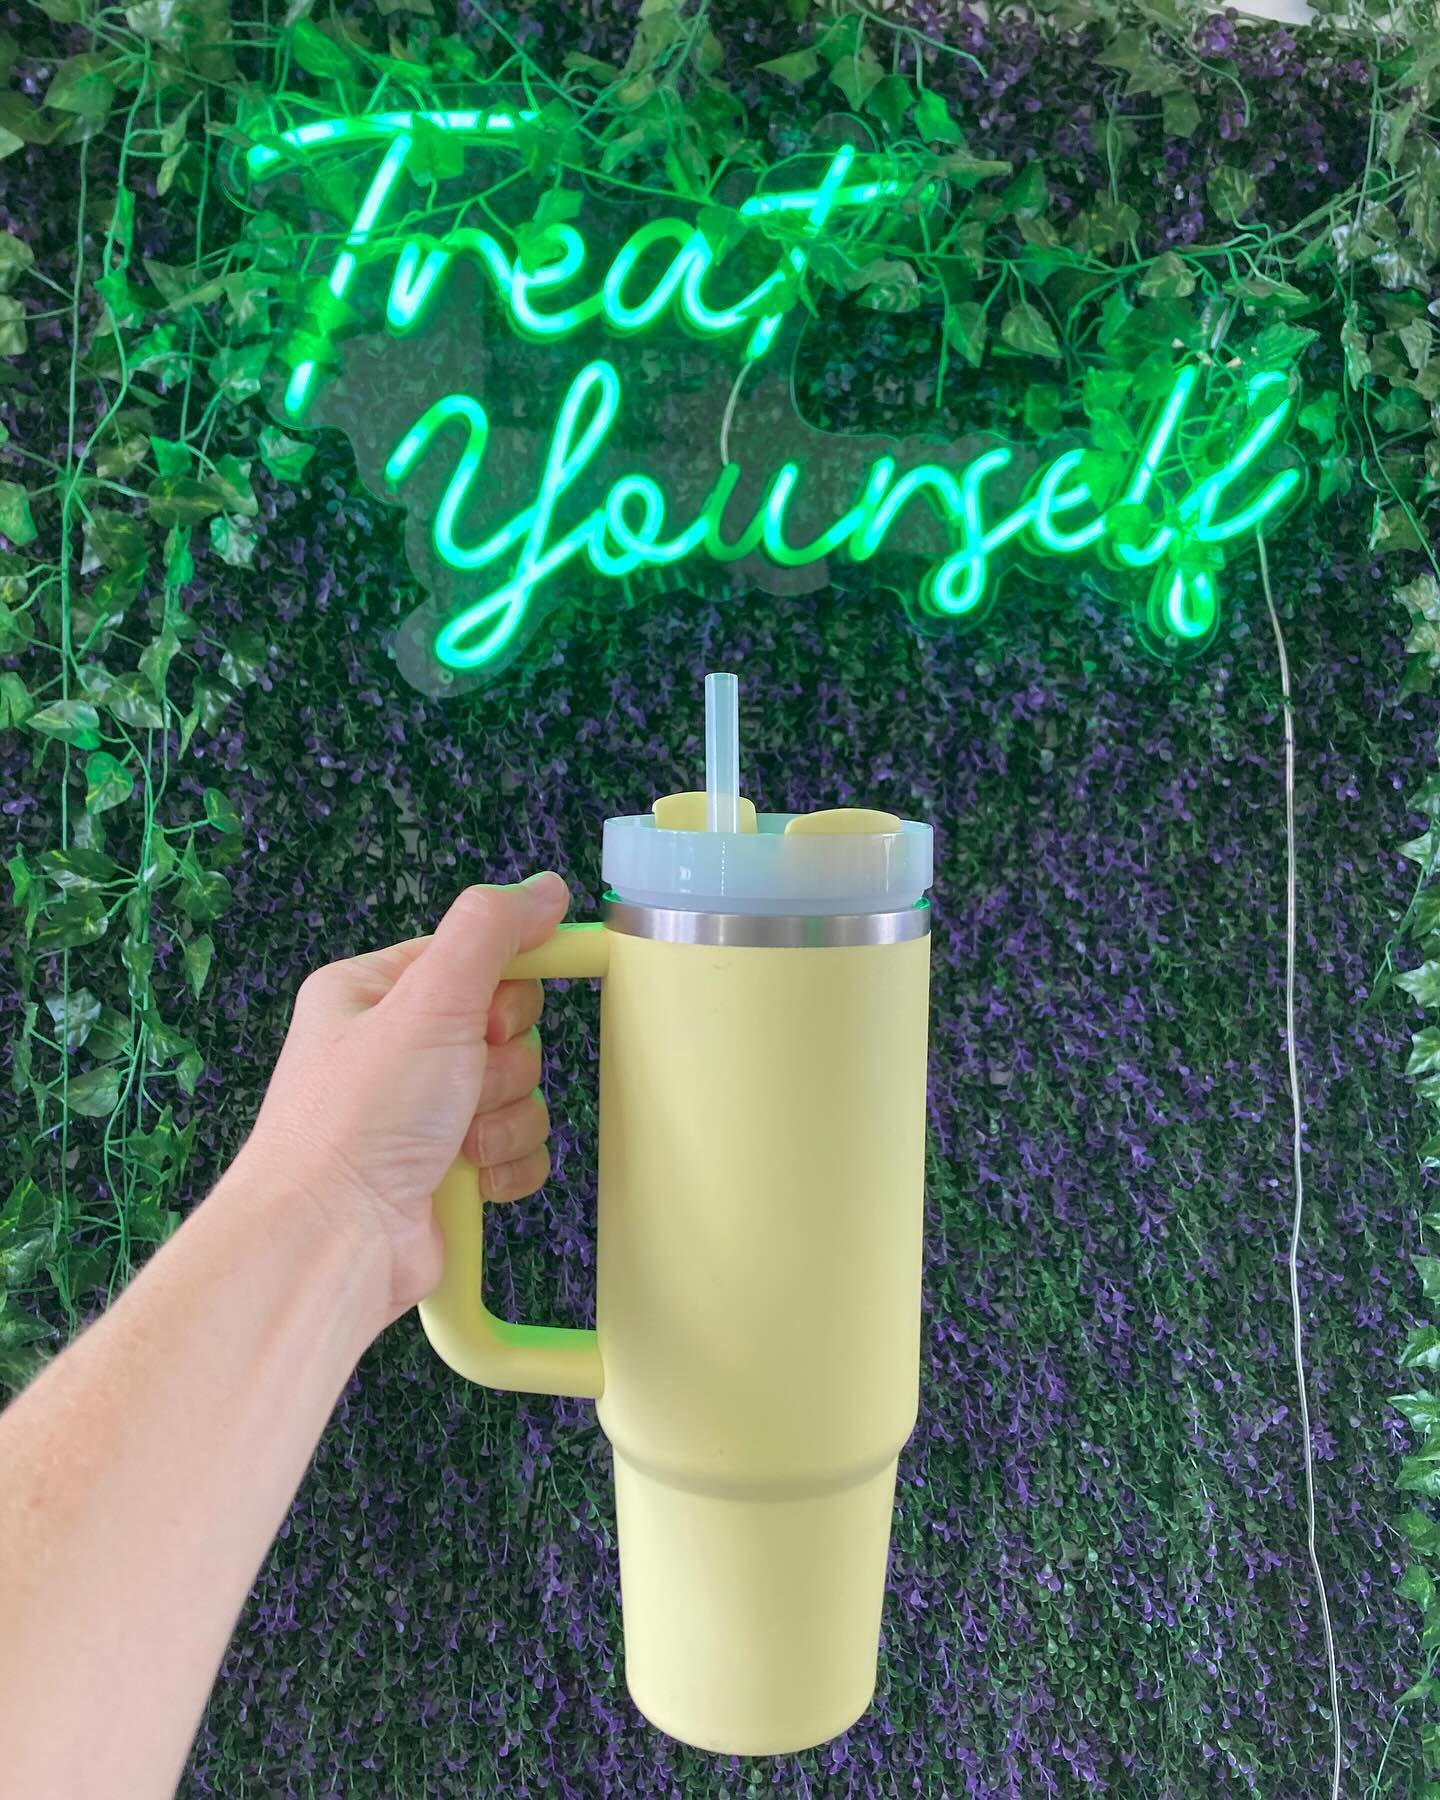 Did you know that if bring your clean, reusable water bottle you get $1 off your drink order? Remember, we usually give heavy pours so the bigger the bottle, the better 😉

If your neighborhood smoothie spot isn&rsquo;t going out of their way to make